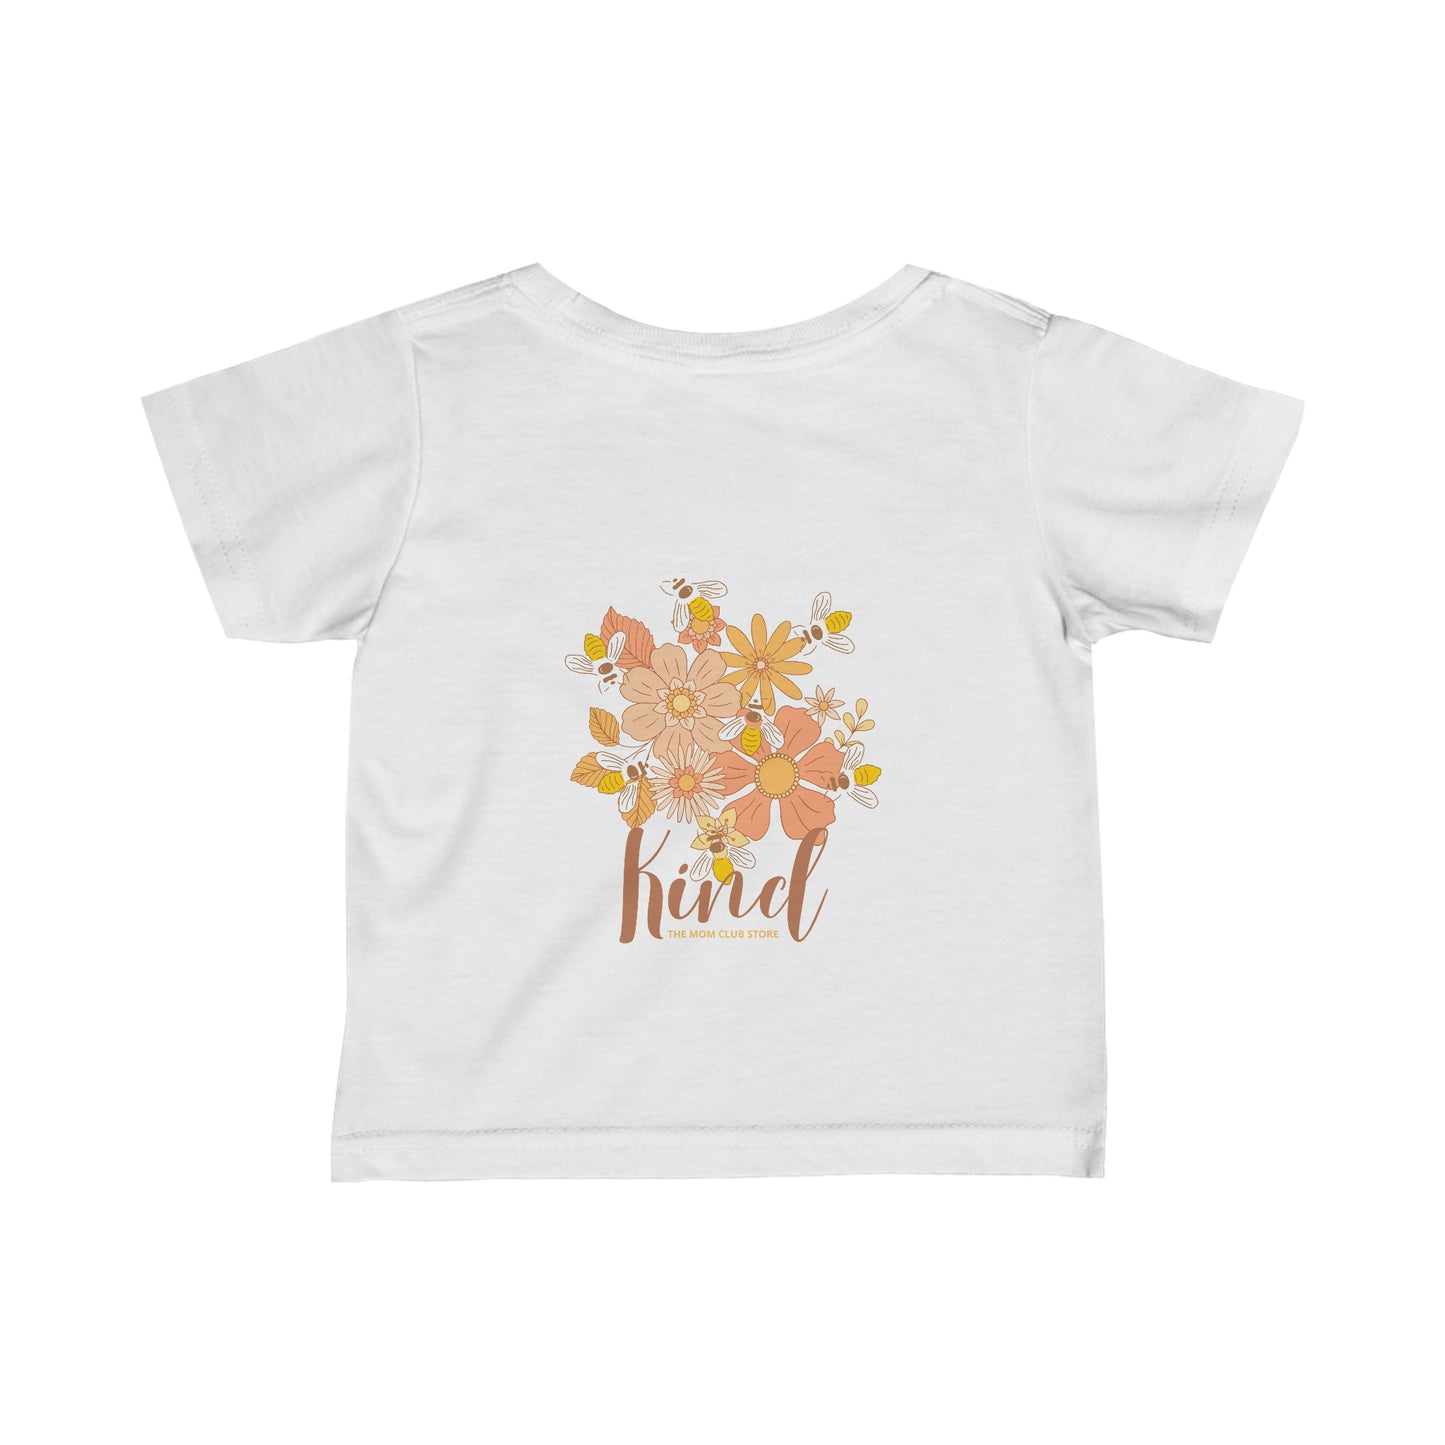 BEE KIND unisex print short sleeve t-shirt for 6m-24m